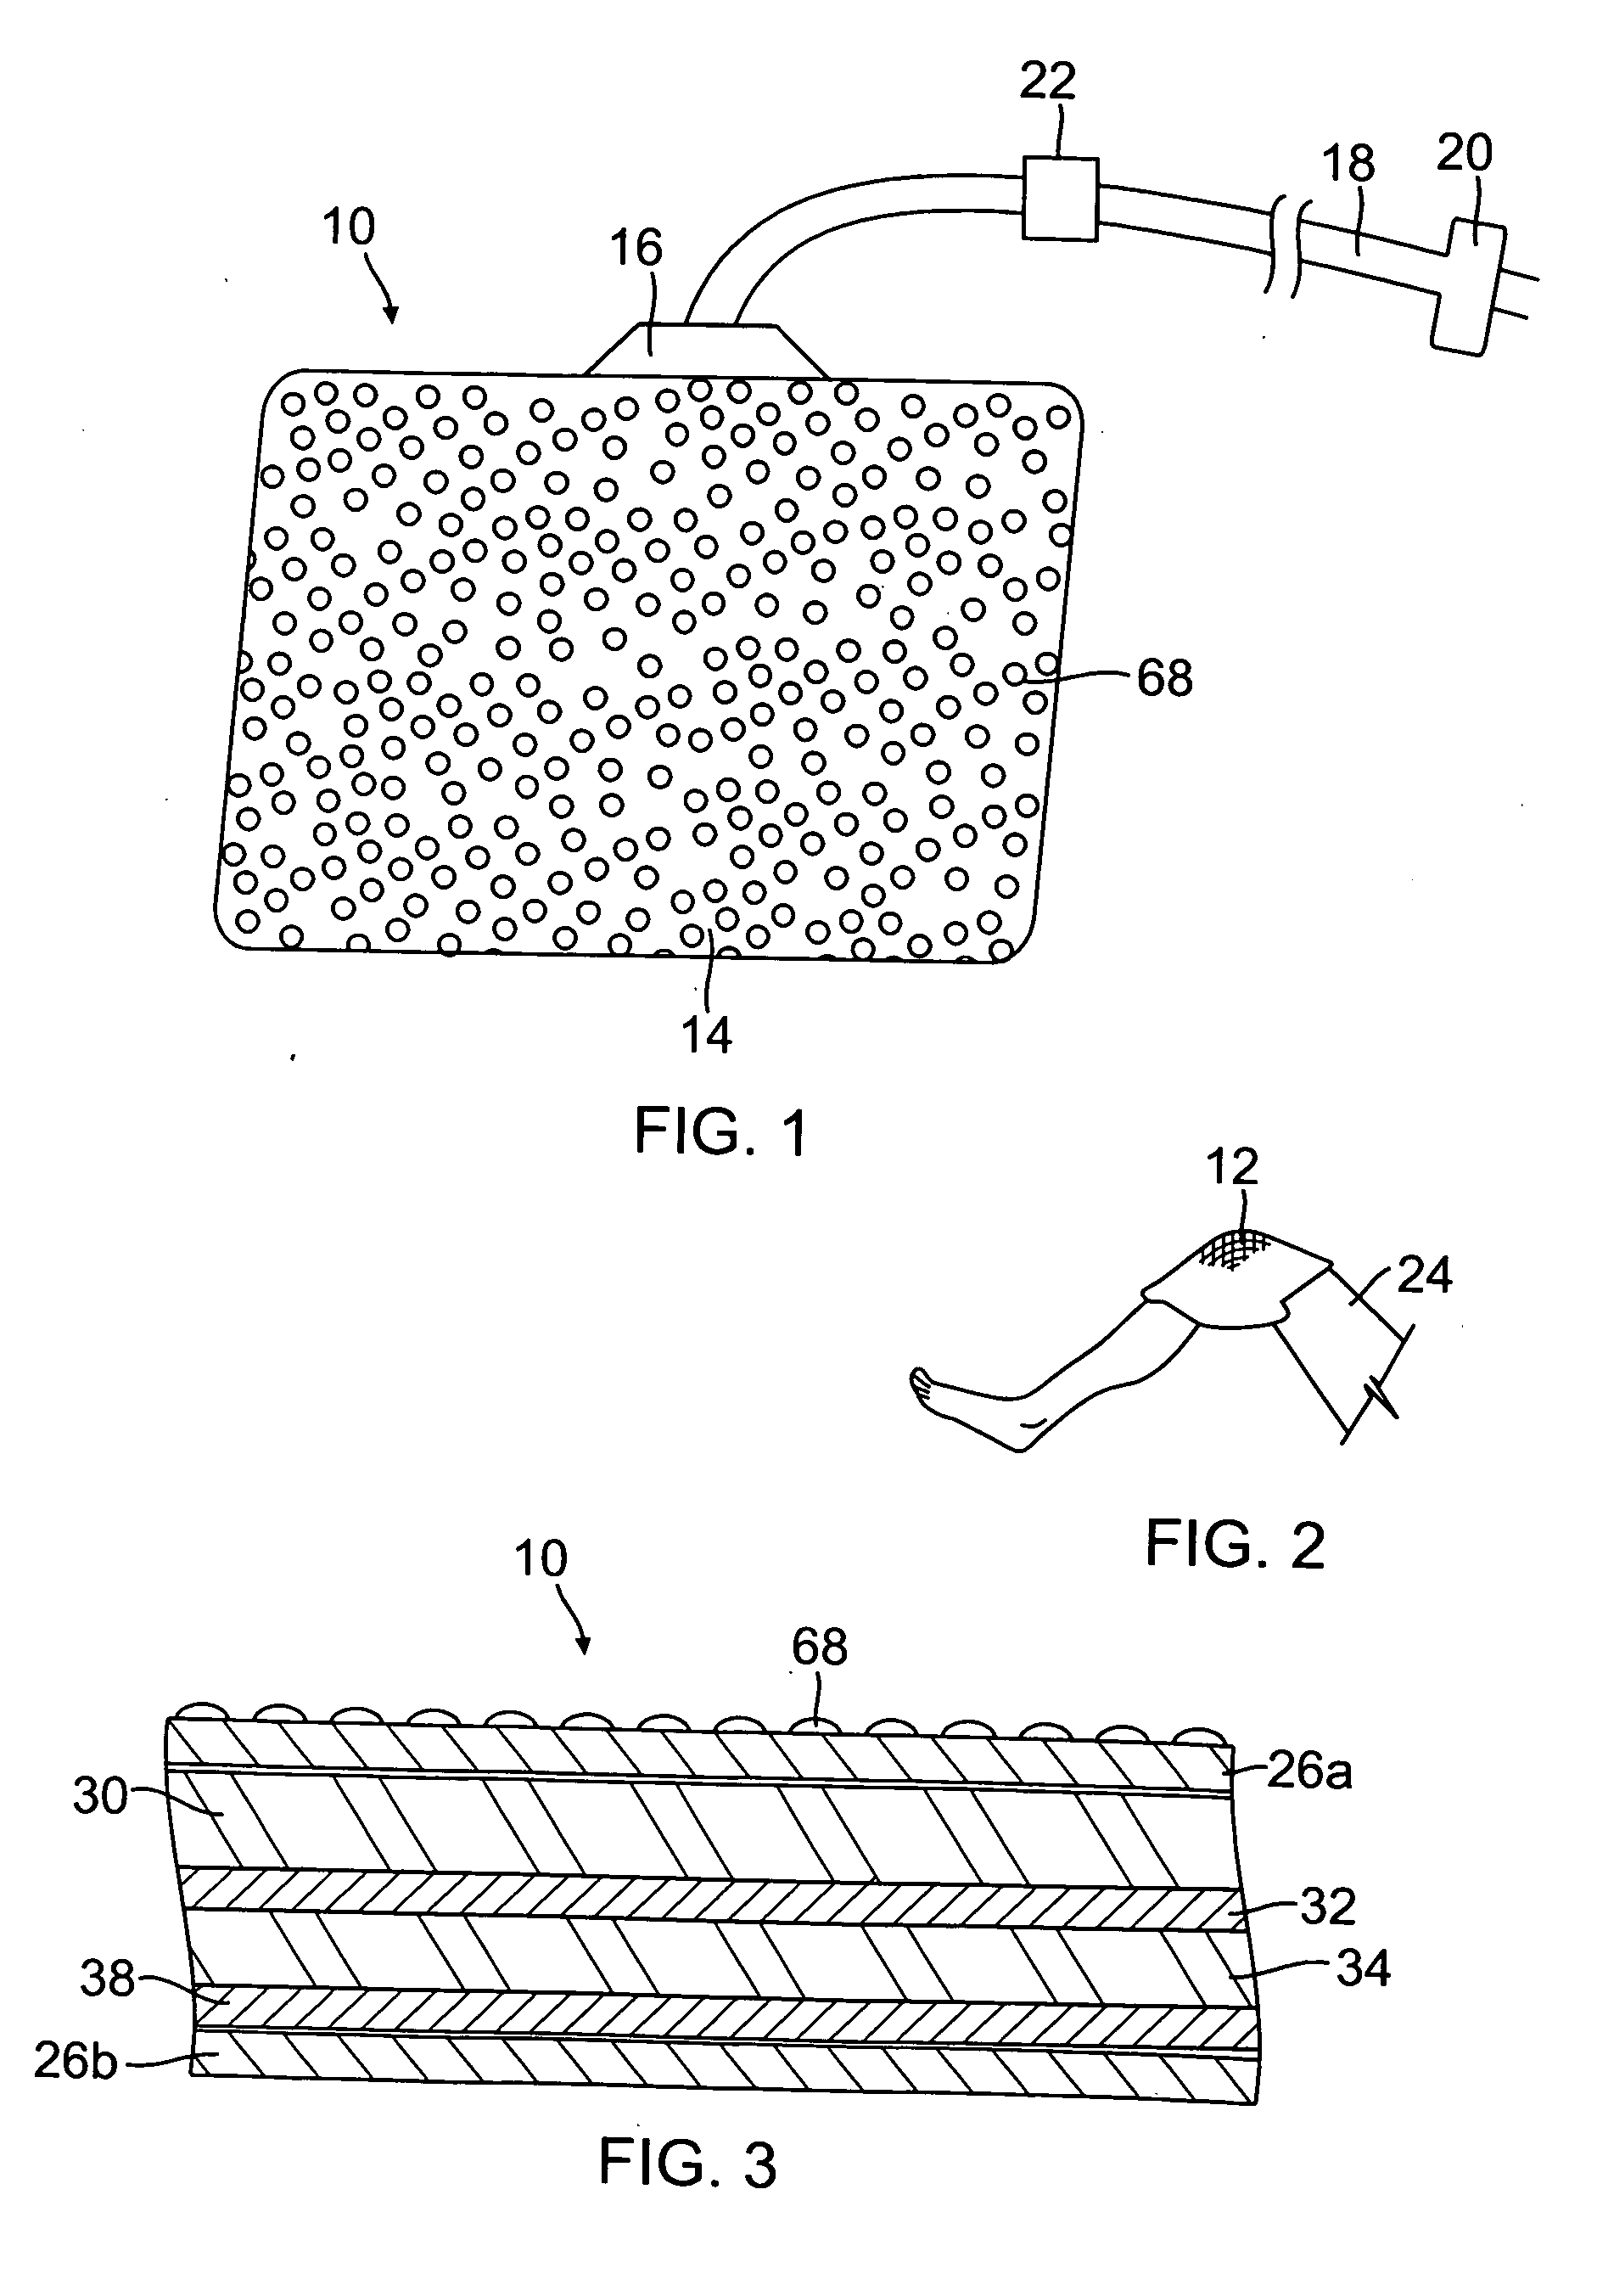 Radiant heating apparatus and method for therapeutic heating